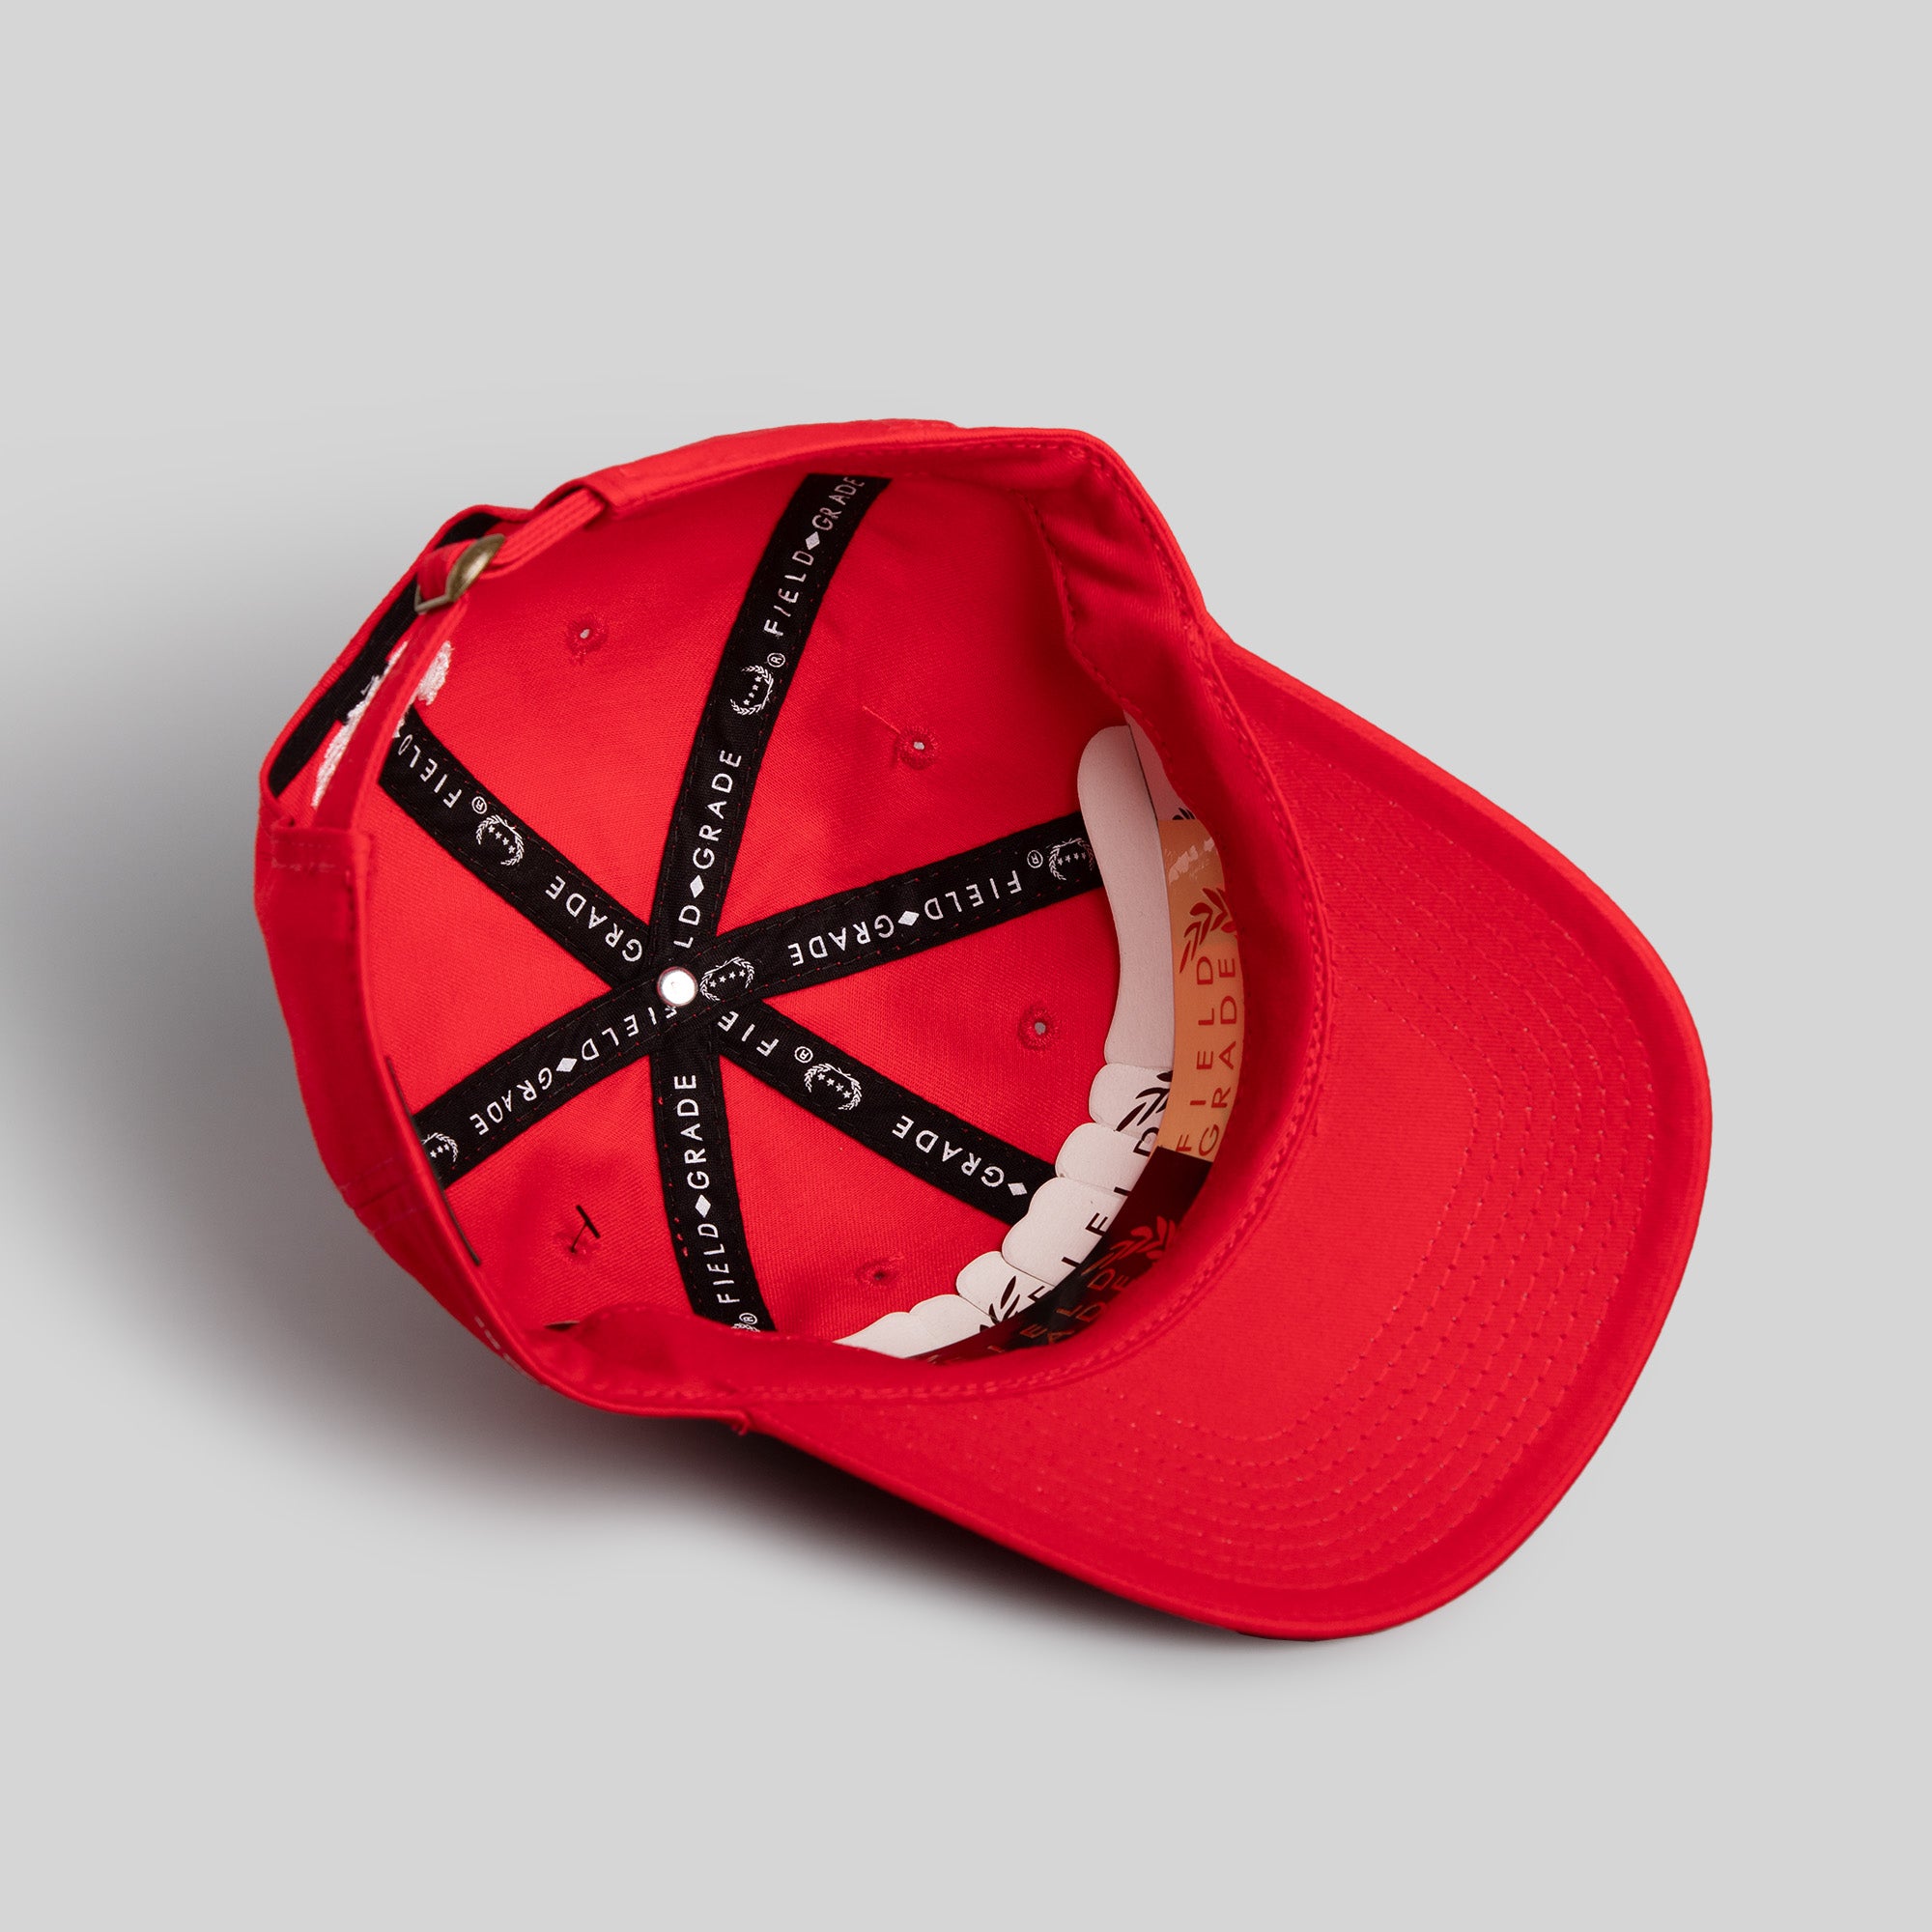 HAVE A NICE DAY VARSITY RED RELAXED FIT HAT